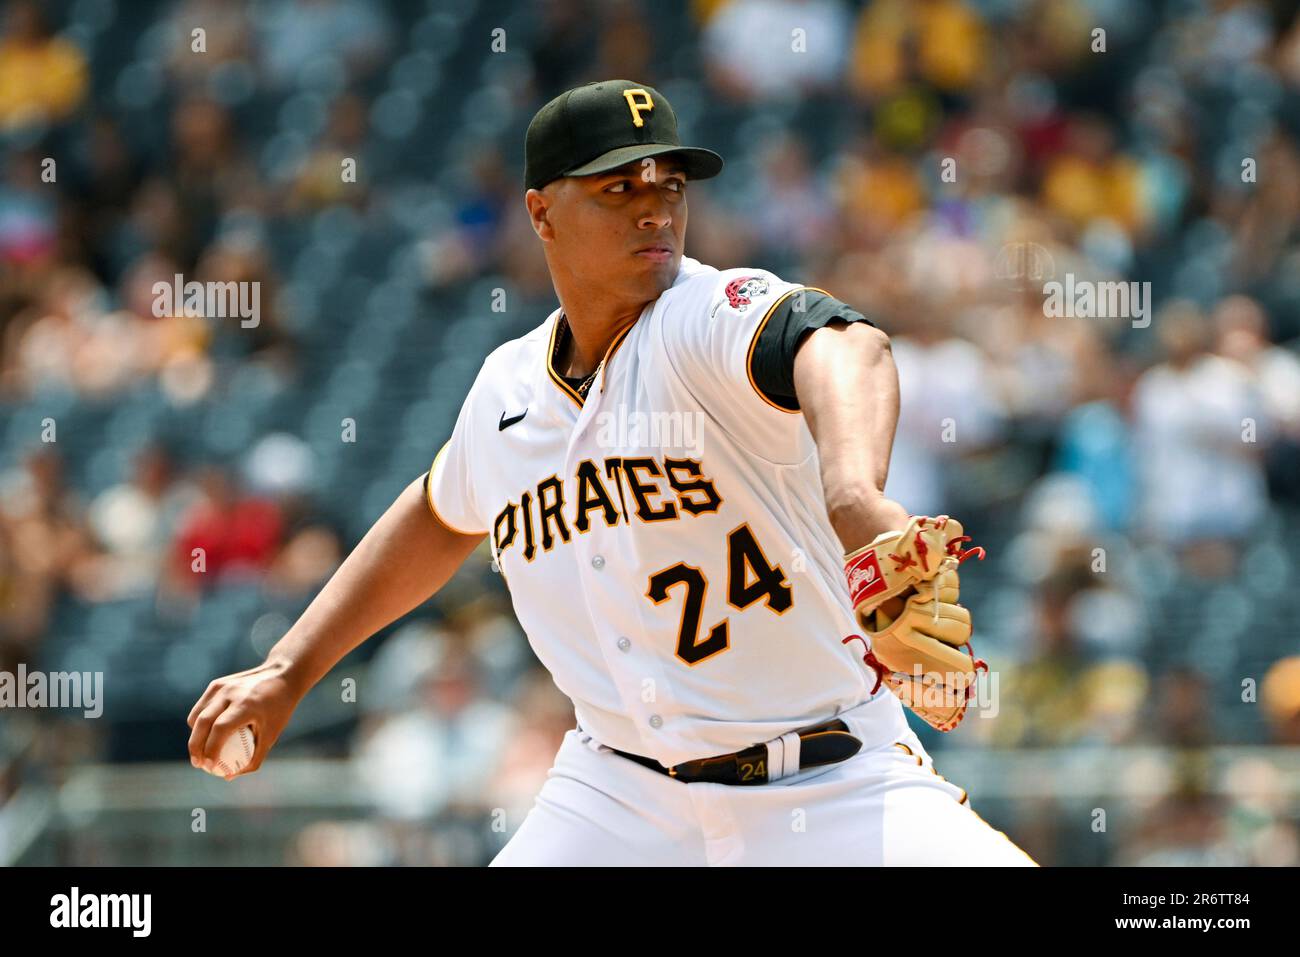 Pittsburgh Pirates starting pitcher Johan Oviedo (24) delivers against the  Texas Rangers in the fourth inning of a baseball game, Wednesday, May 24,  in Pittsburgh. Texas Rangers won 3-2. (AP Photo/Barry Reeger